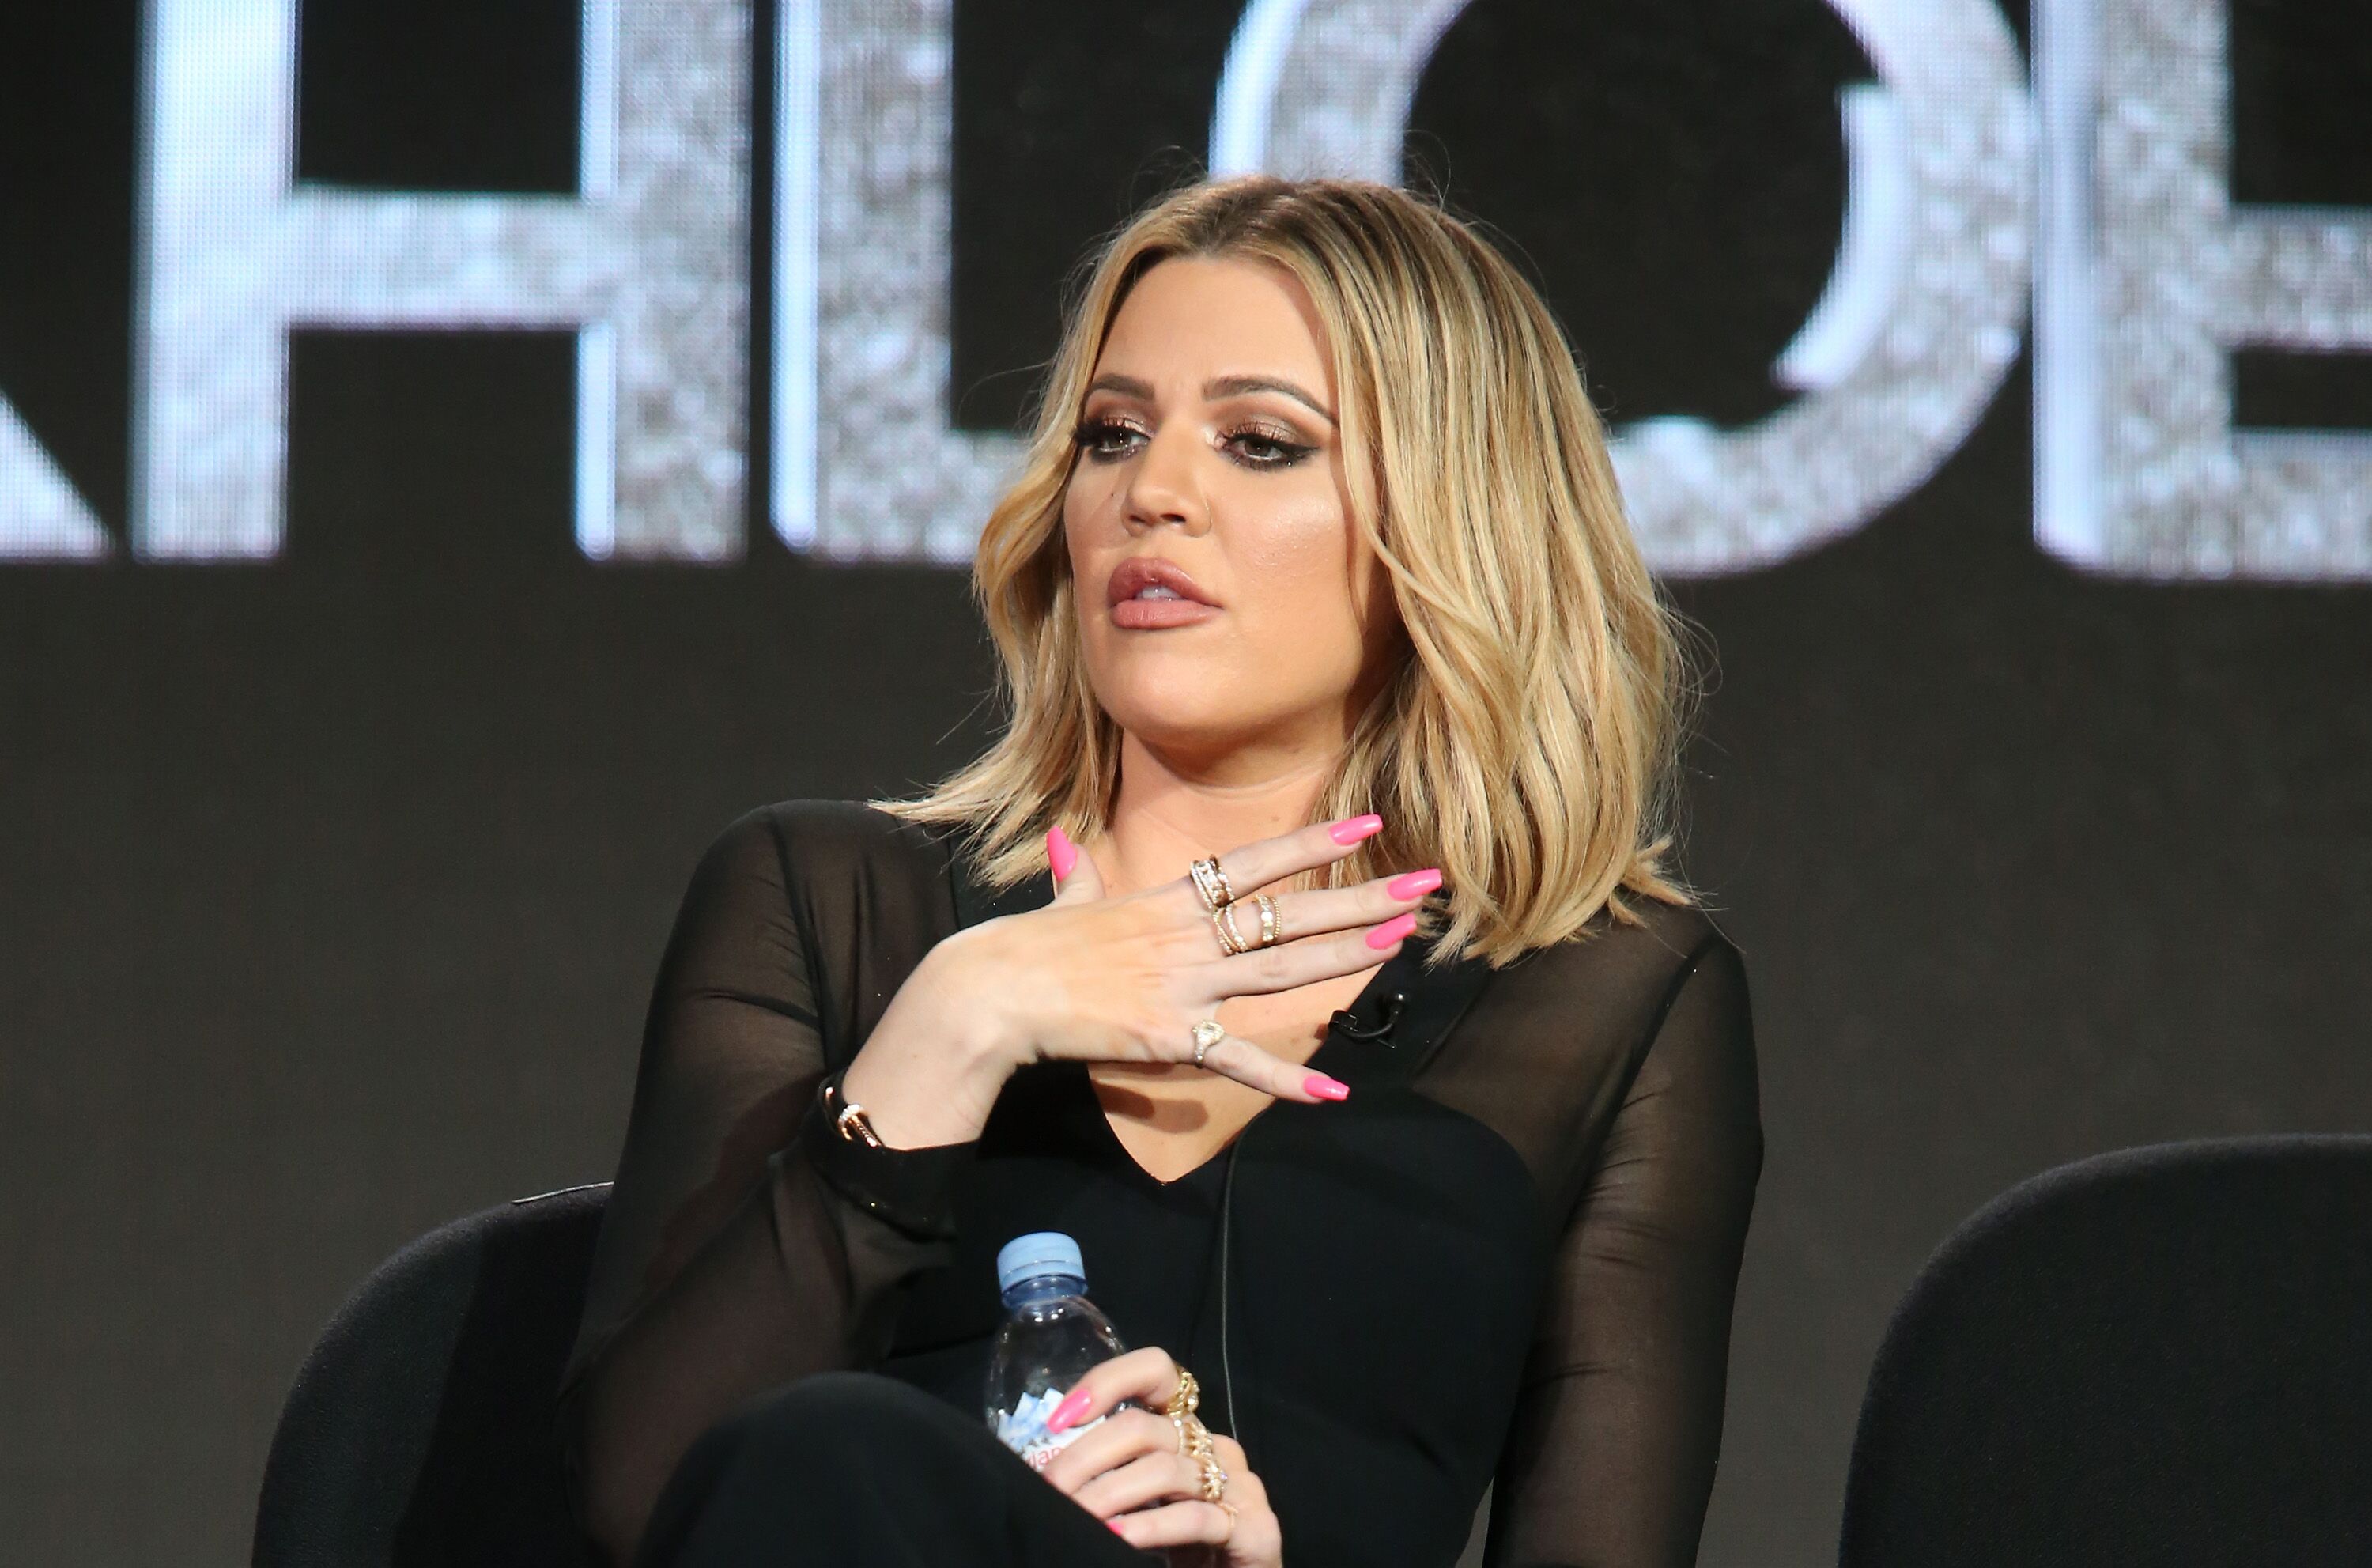 Khloe Kardashian onstage at the This is Cable 2016 Television Critics Association Press Tour | Source: Getty Images